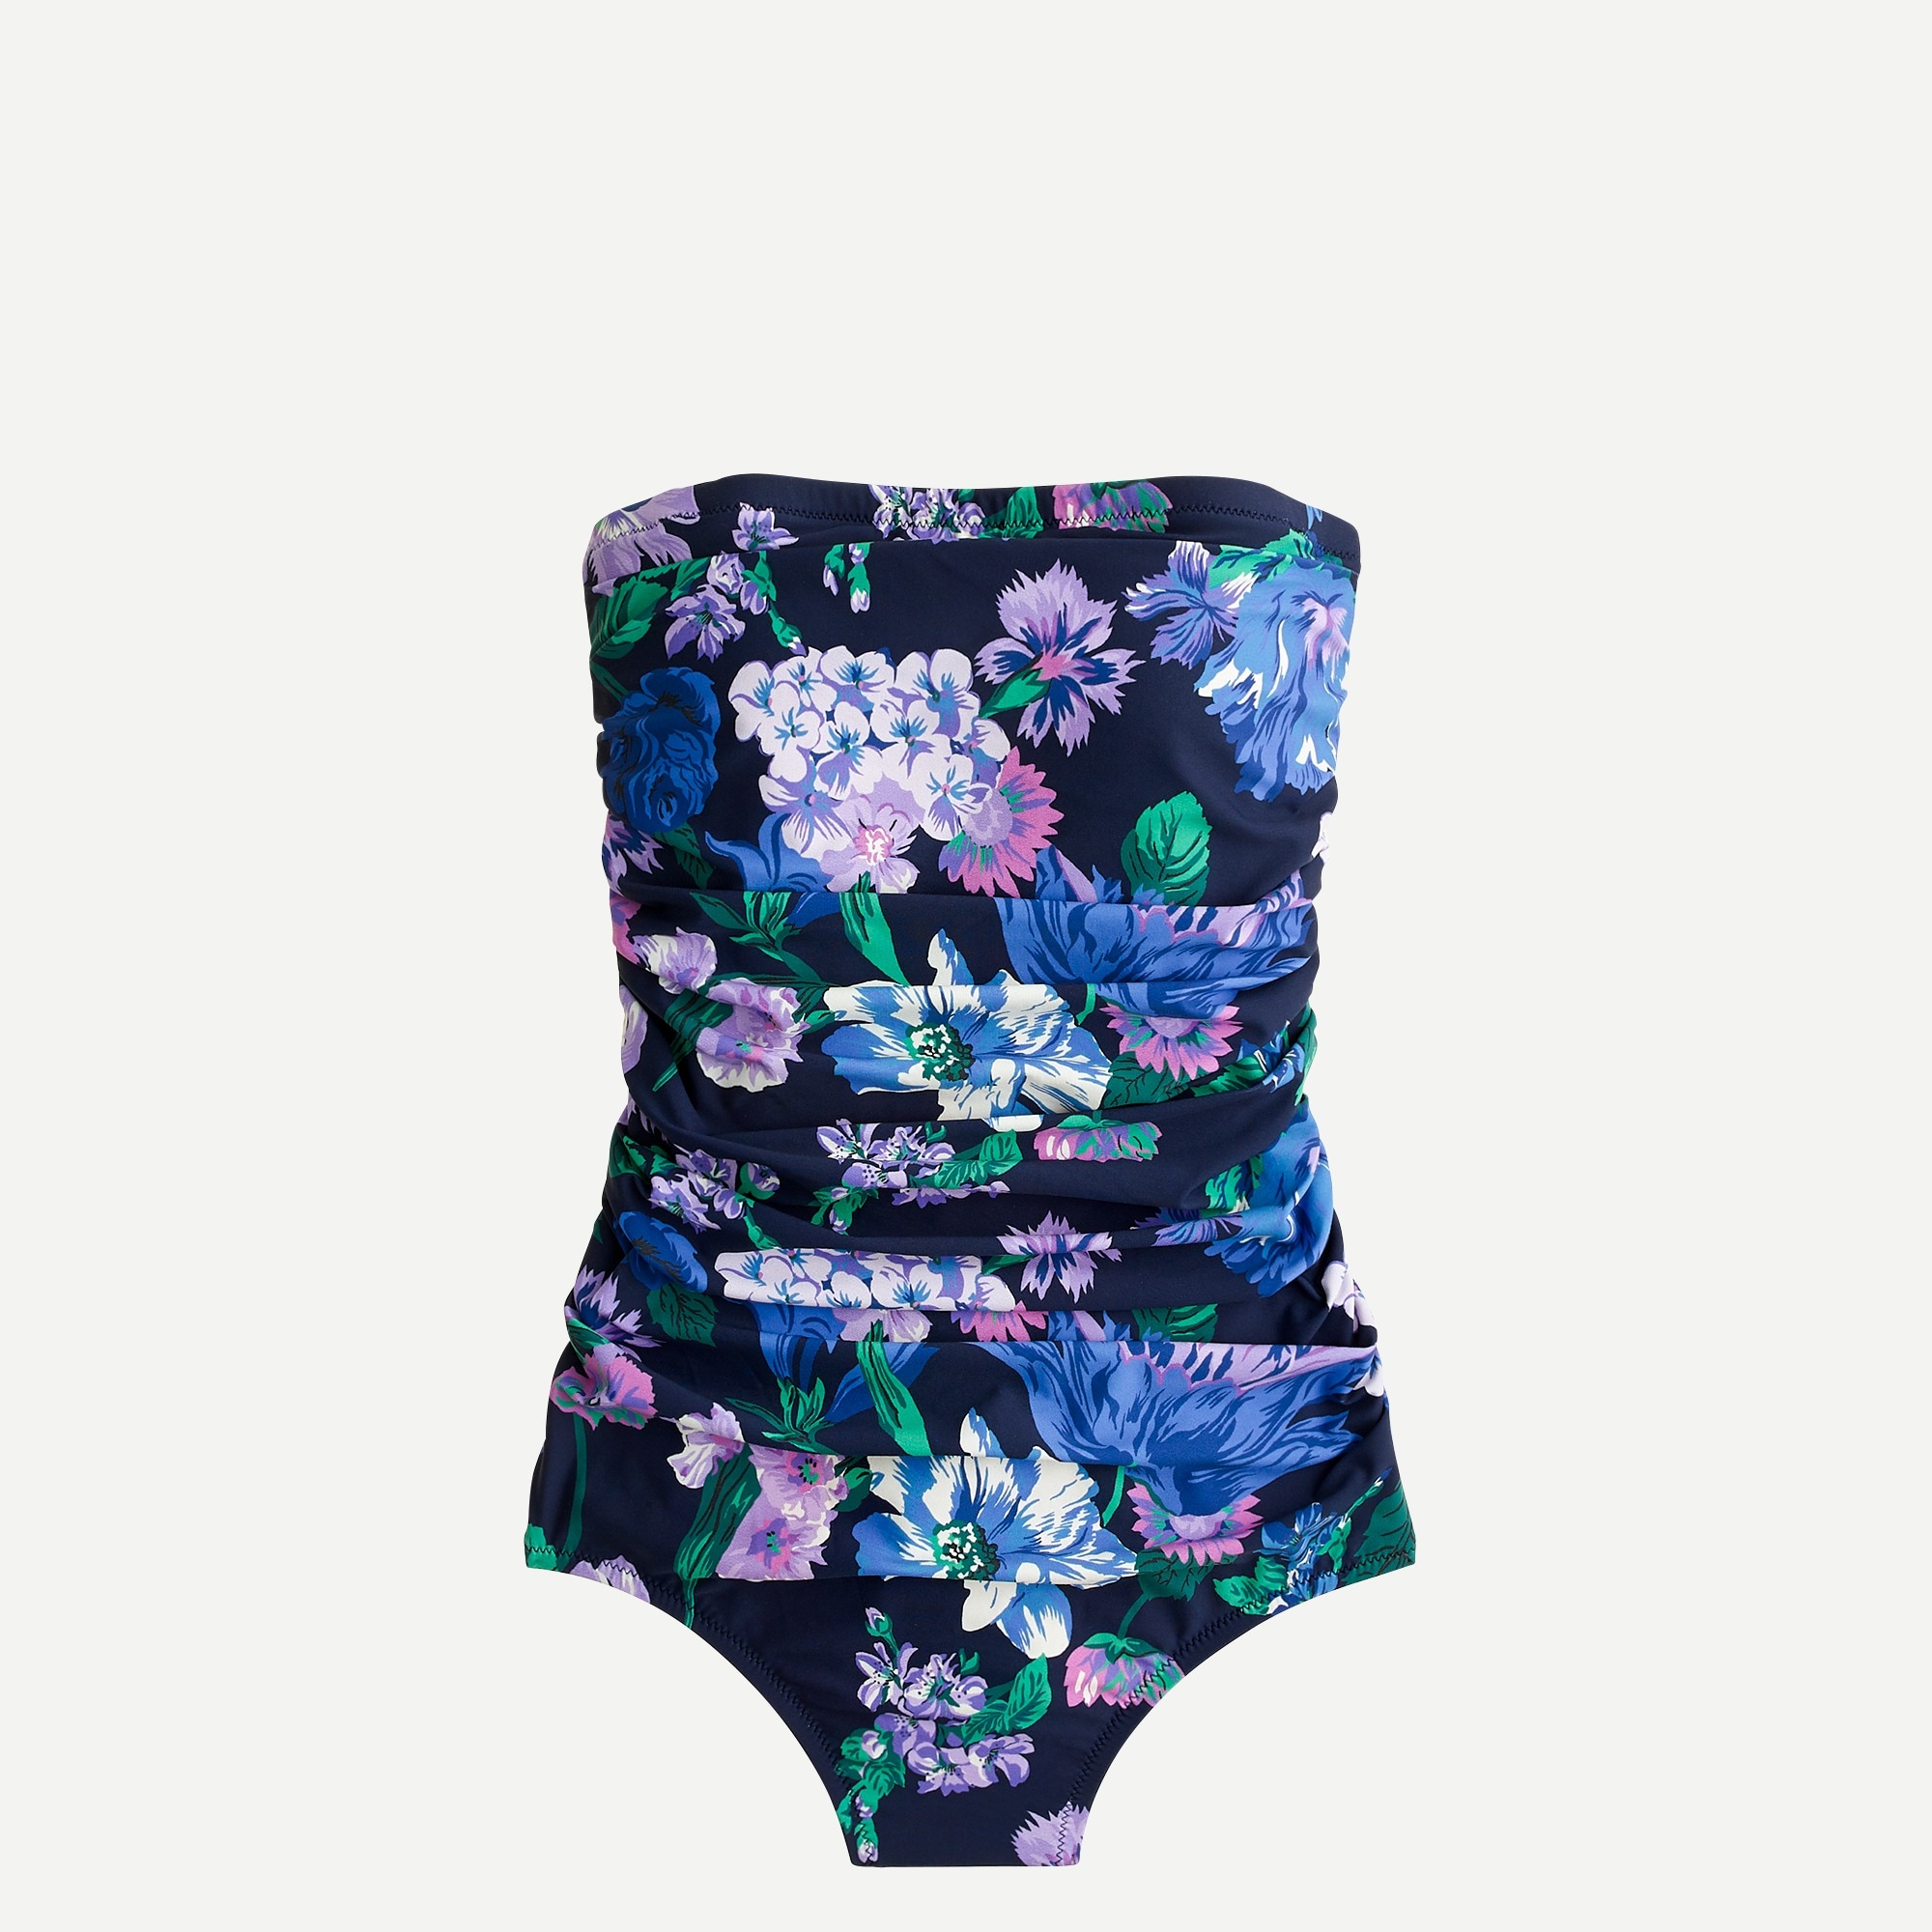 J Crew Ruched Bandeau One Piece In Retro Floral For Women